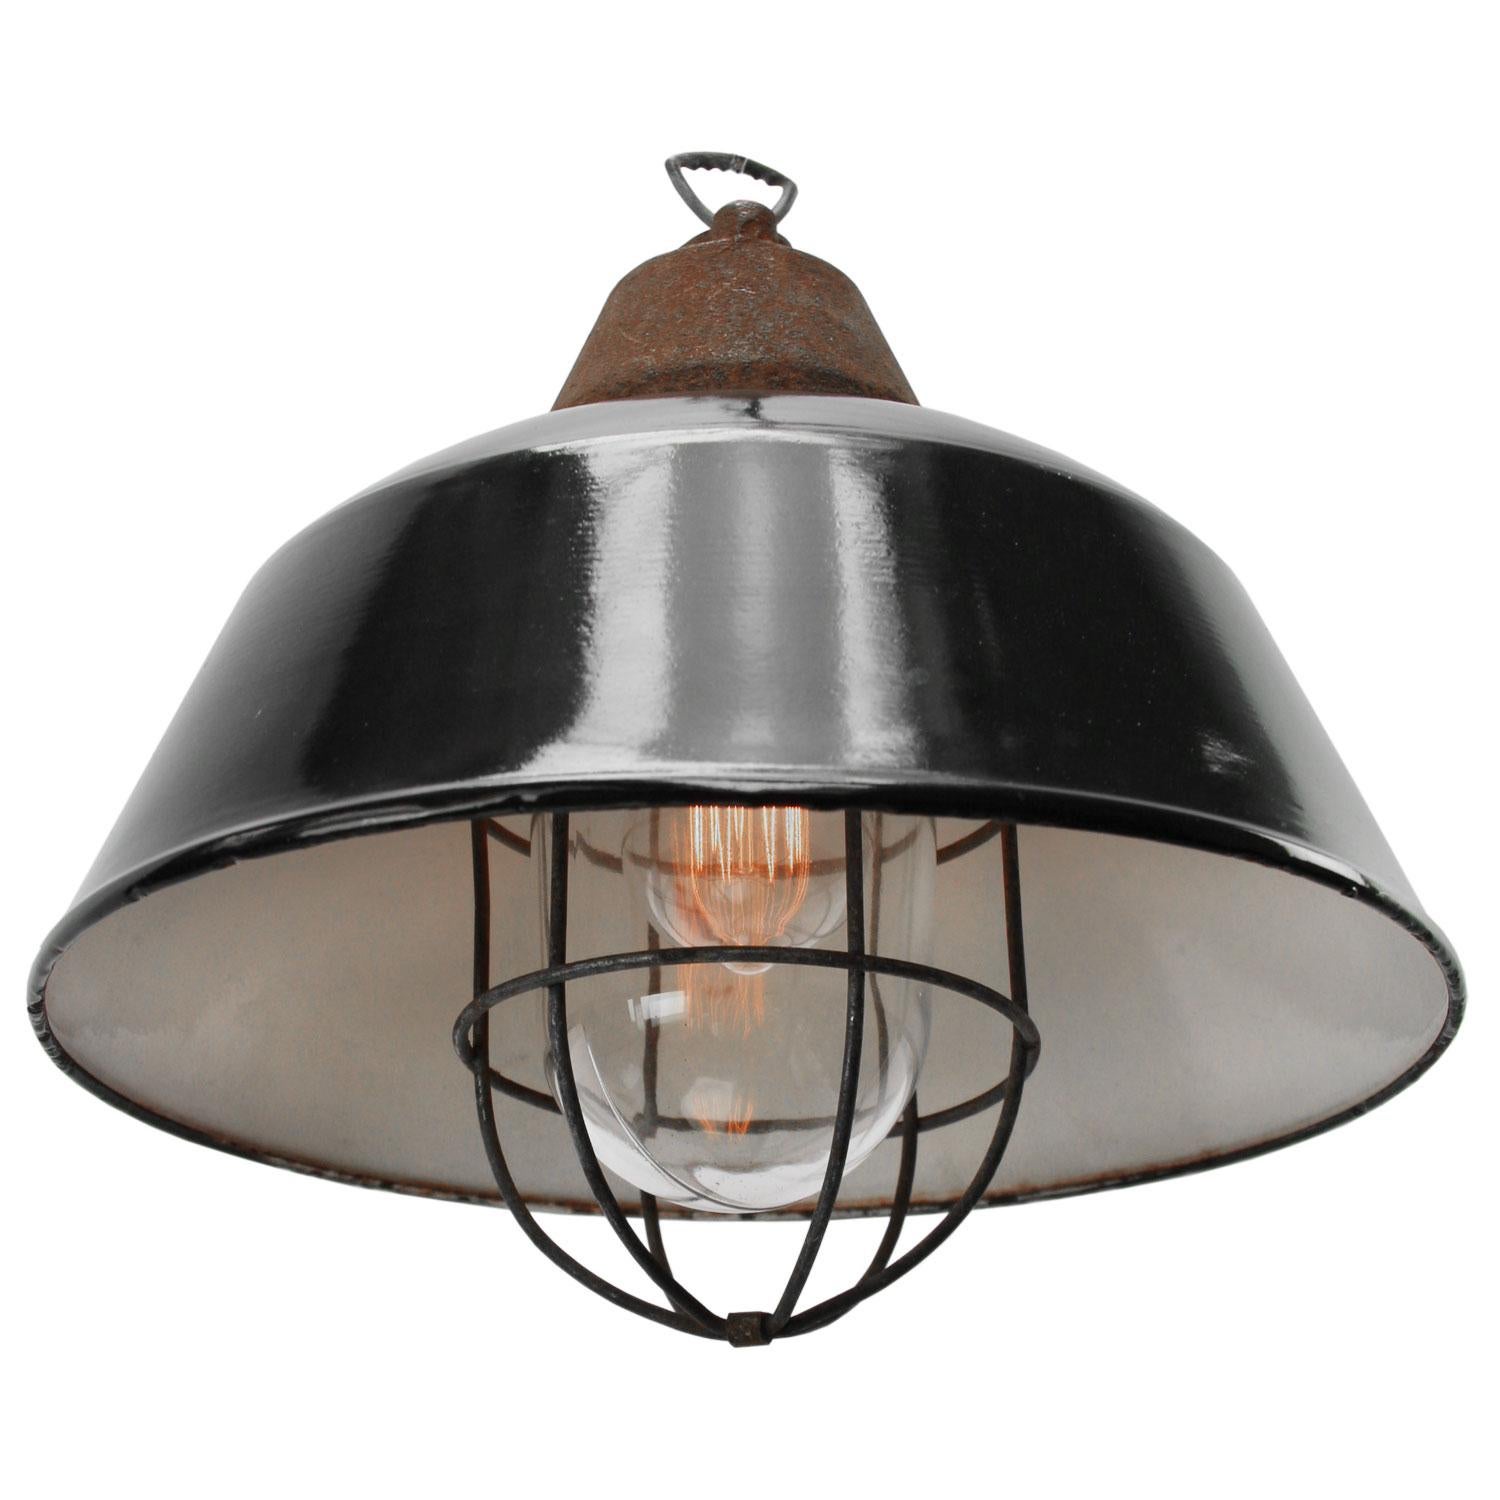 Factory pendant
black enamel white interior
cast iron top with clear glass with cage

Weight 3.40 kg / 7.5 lb

Priced per individual item. All lamps have been made suitable by international standards for incandescent light bulbs,